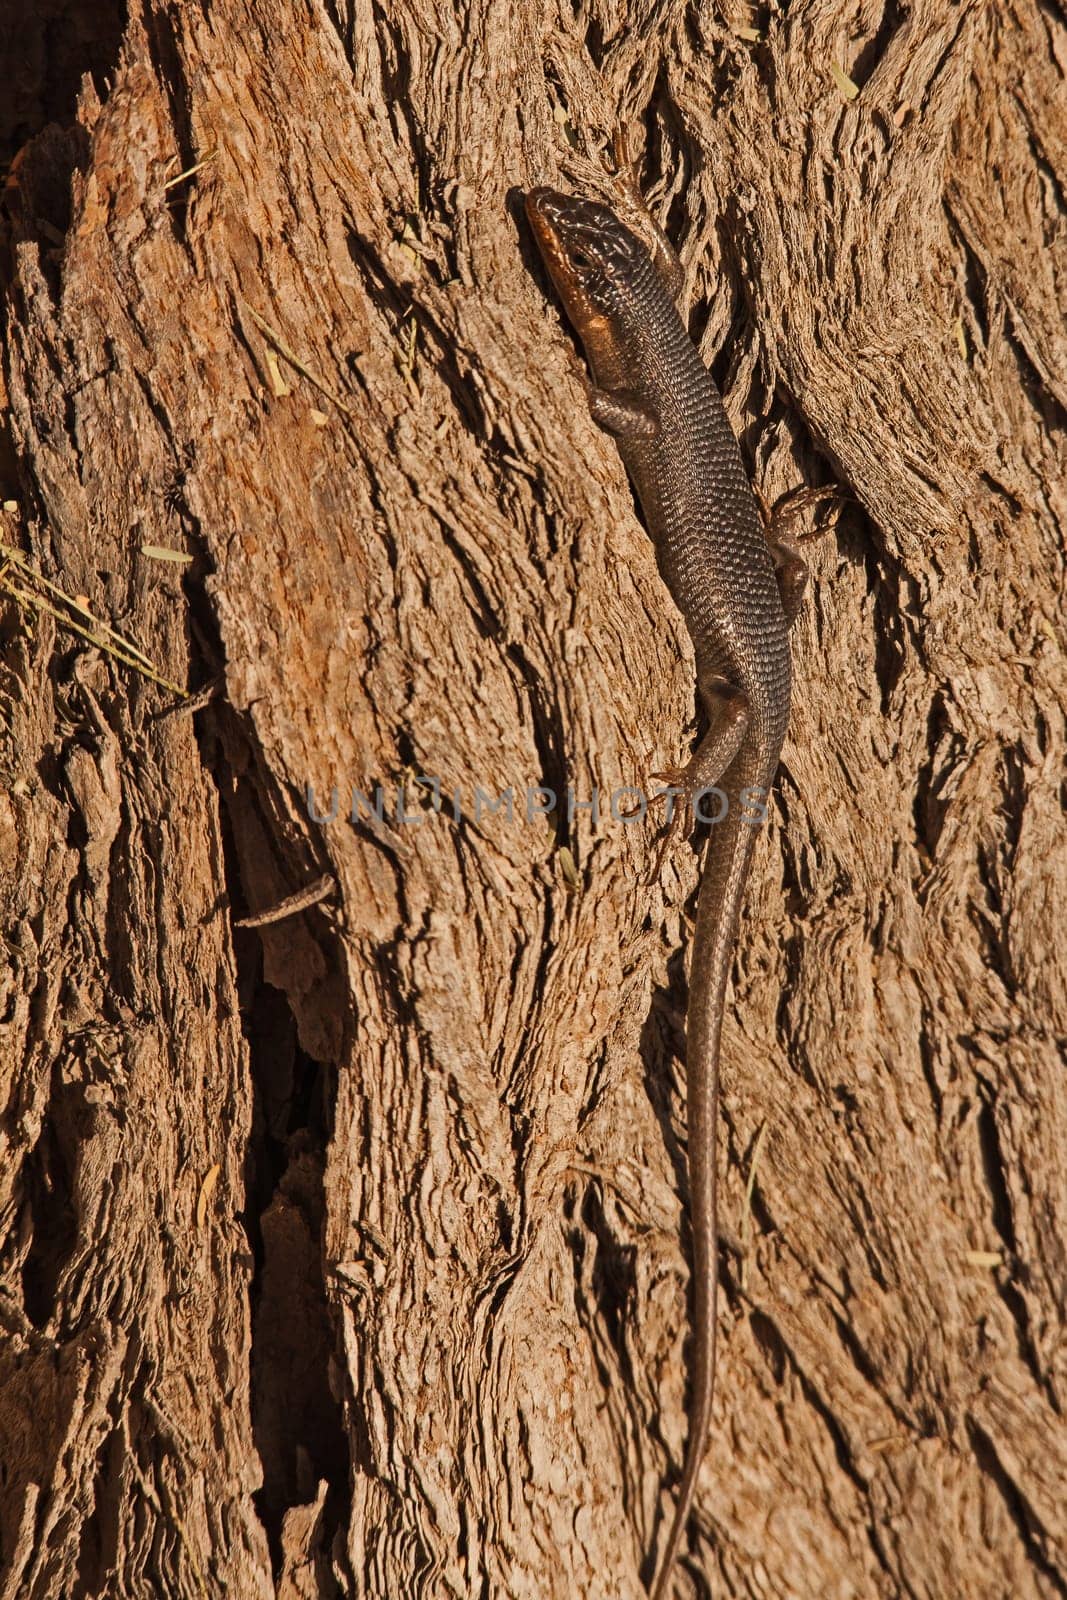 Western Rock Skink (Trachylepis sulcata), possibly the sudspecies ansorgii, on the bark of a Camelthorn tree in the Kgalagadi Transfrontier Park